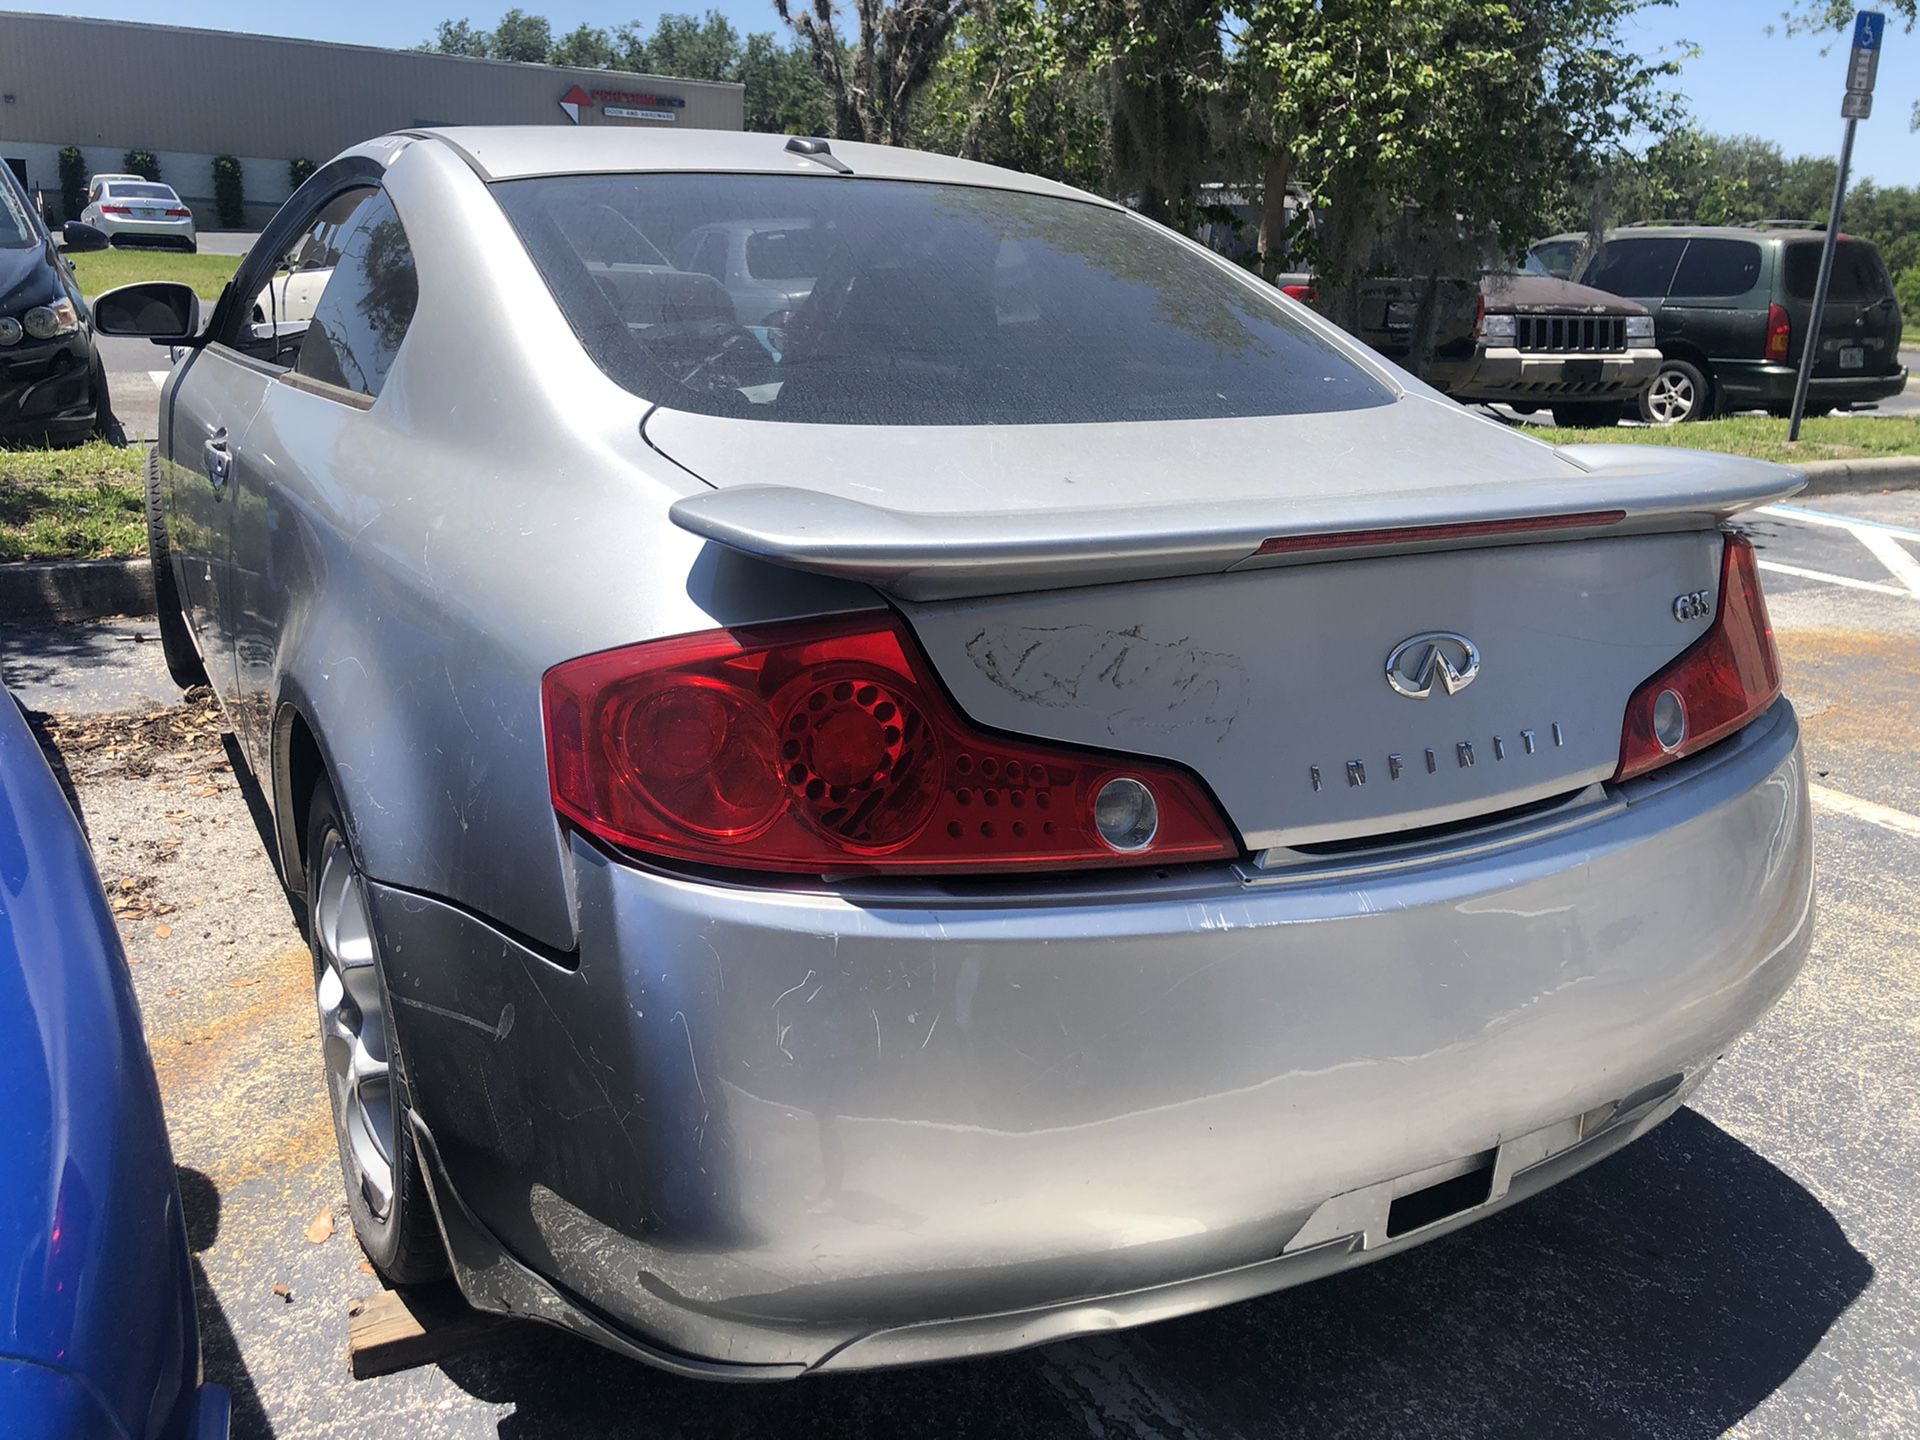 2005 G35 Infiniti Part Out!